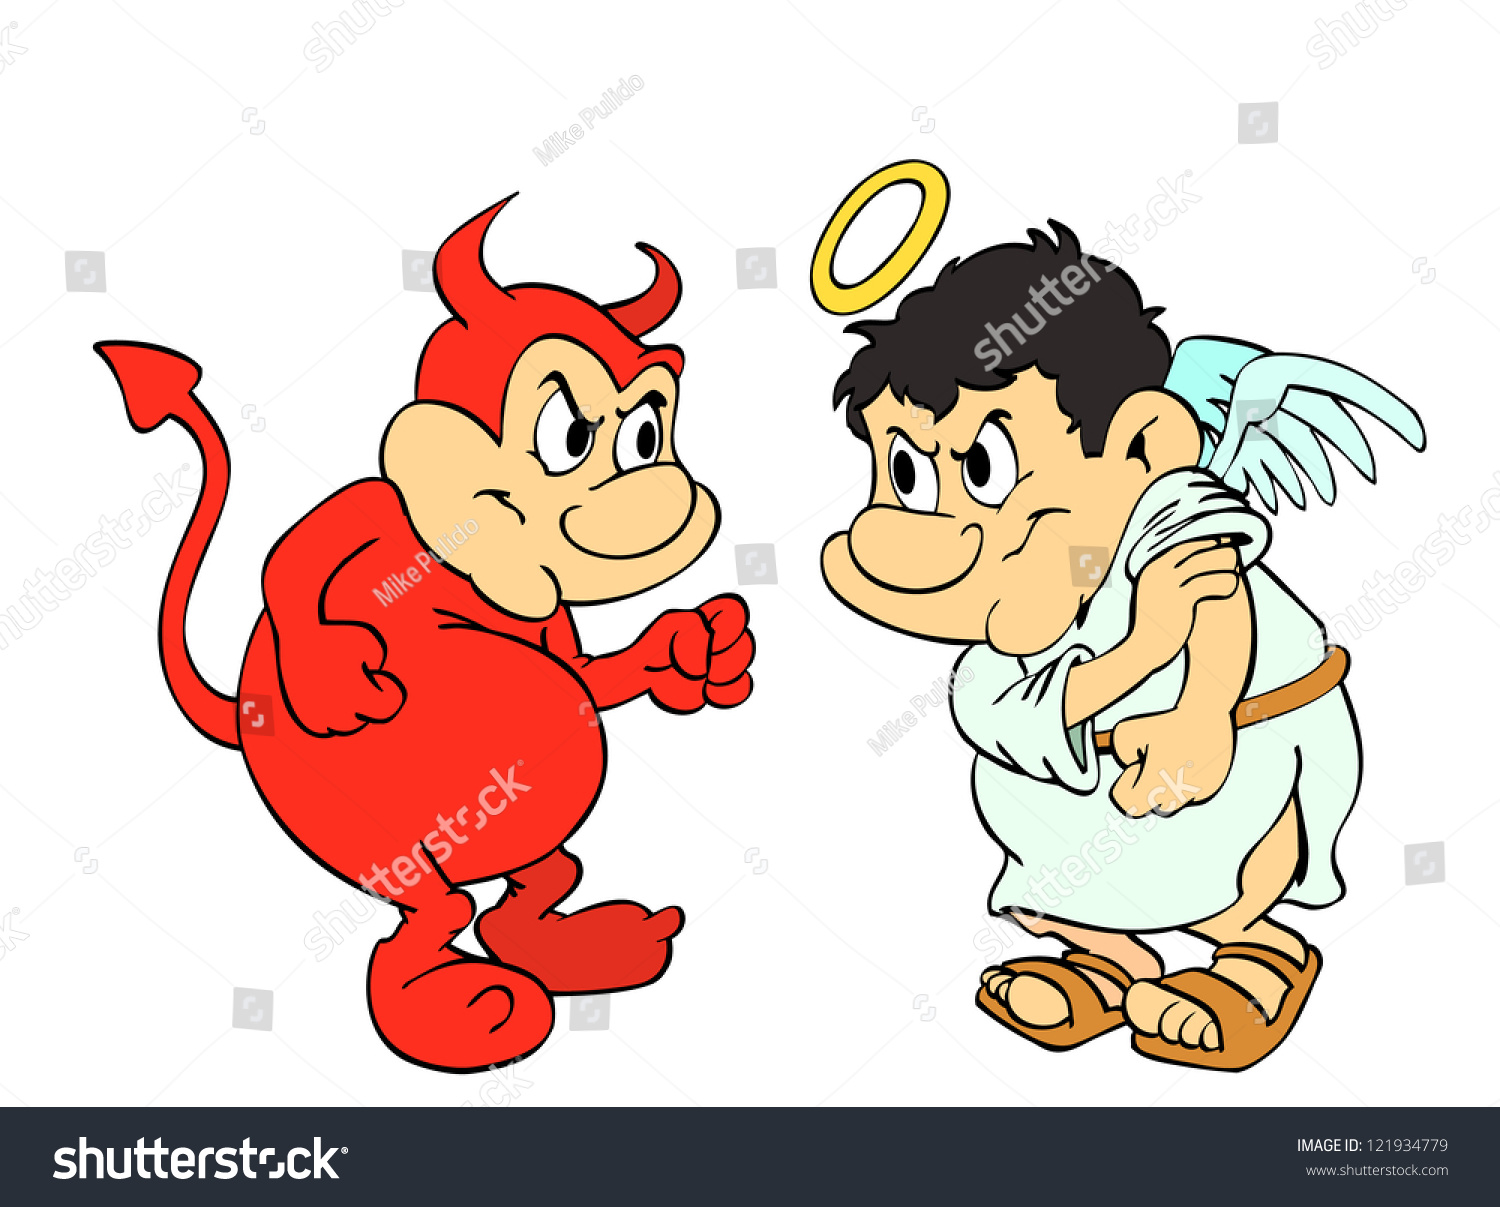 angel and devil clipart free - photo #46